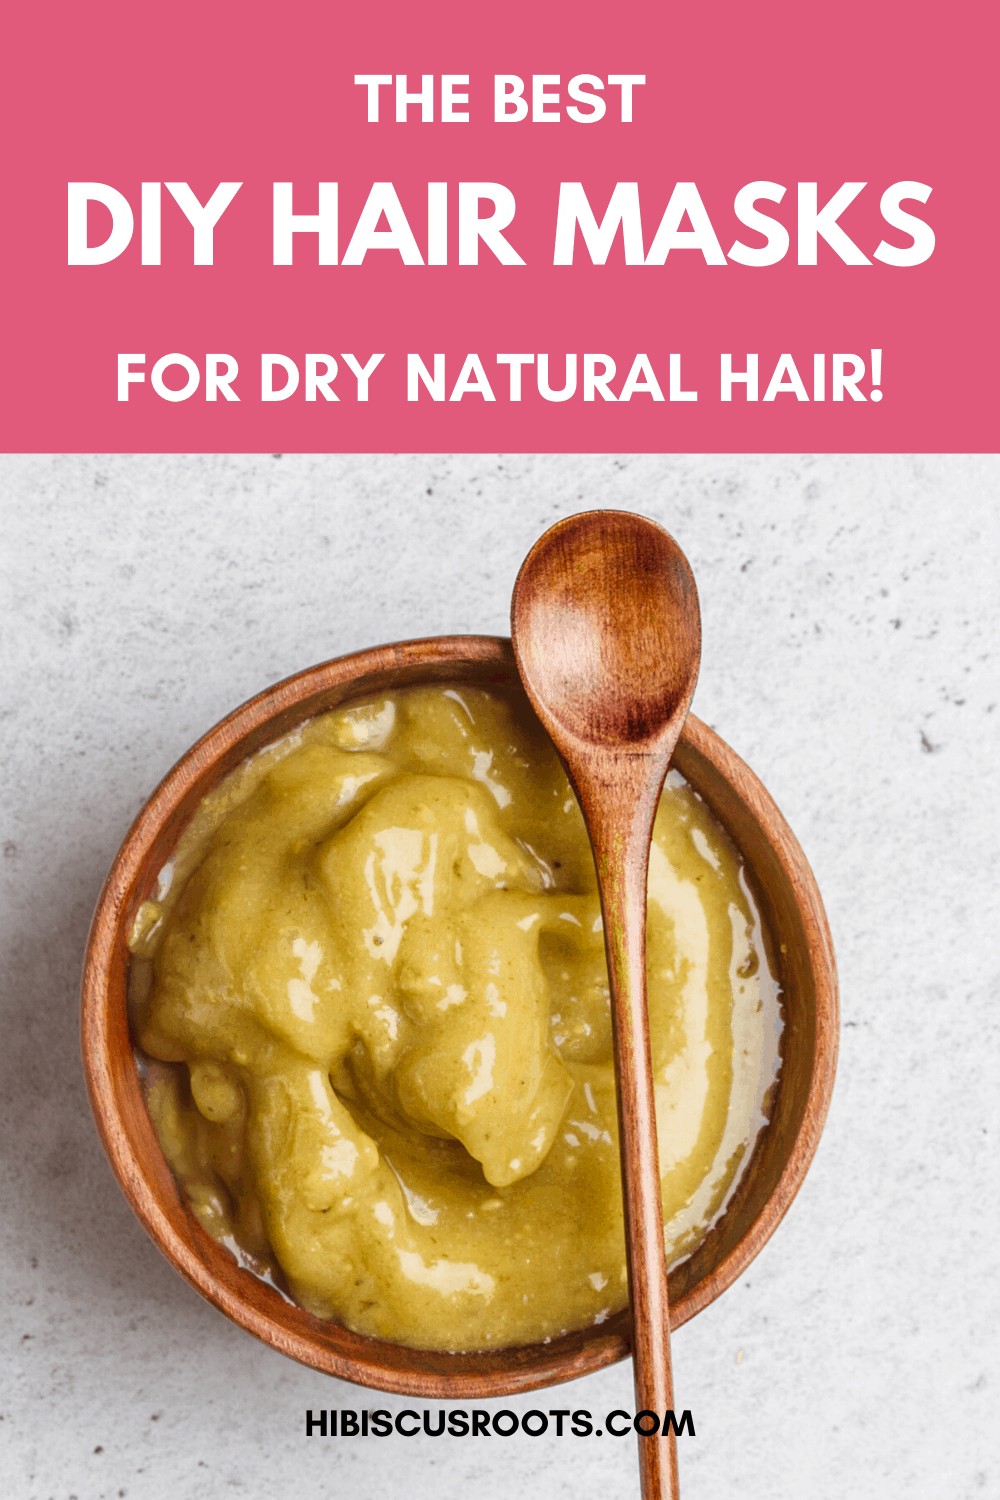 5 DIY Hair Mask Recipes for Extremely Dry Natural Hair! | Hibiscus Roots